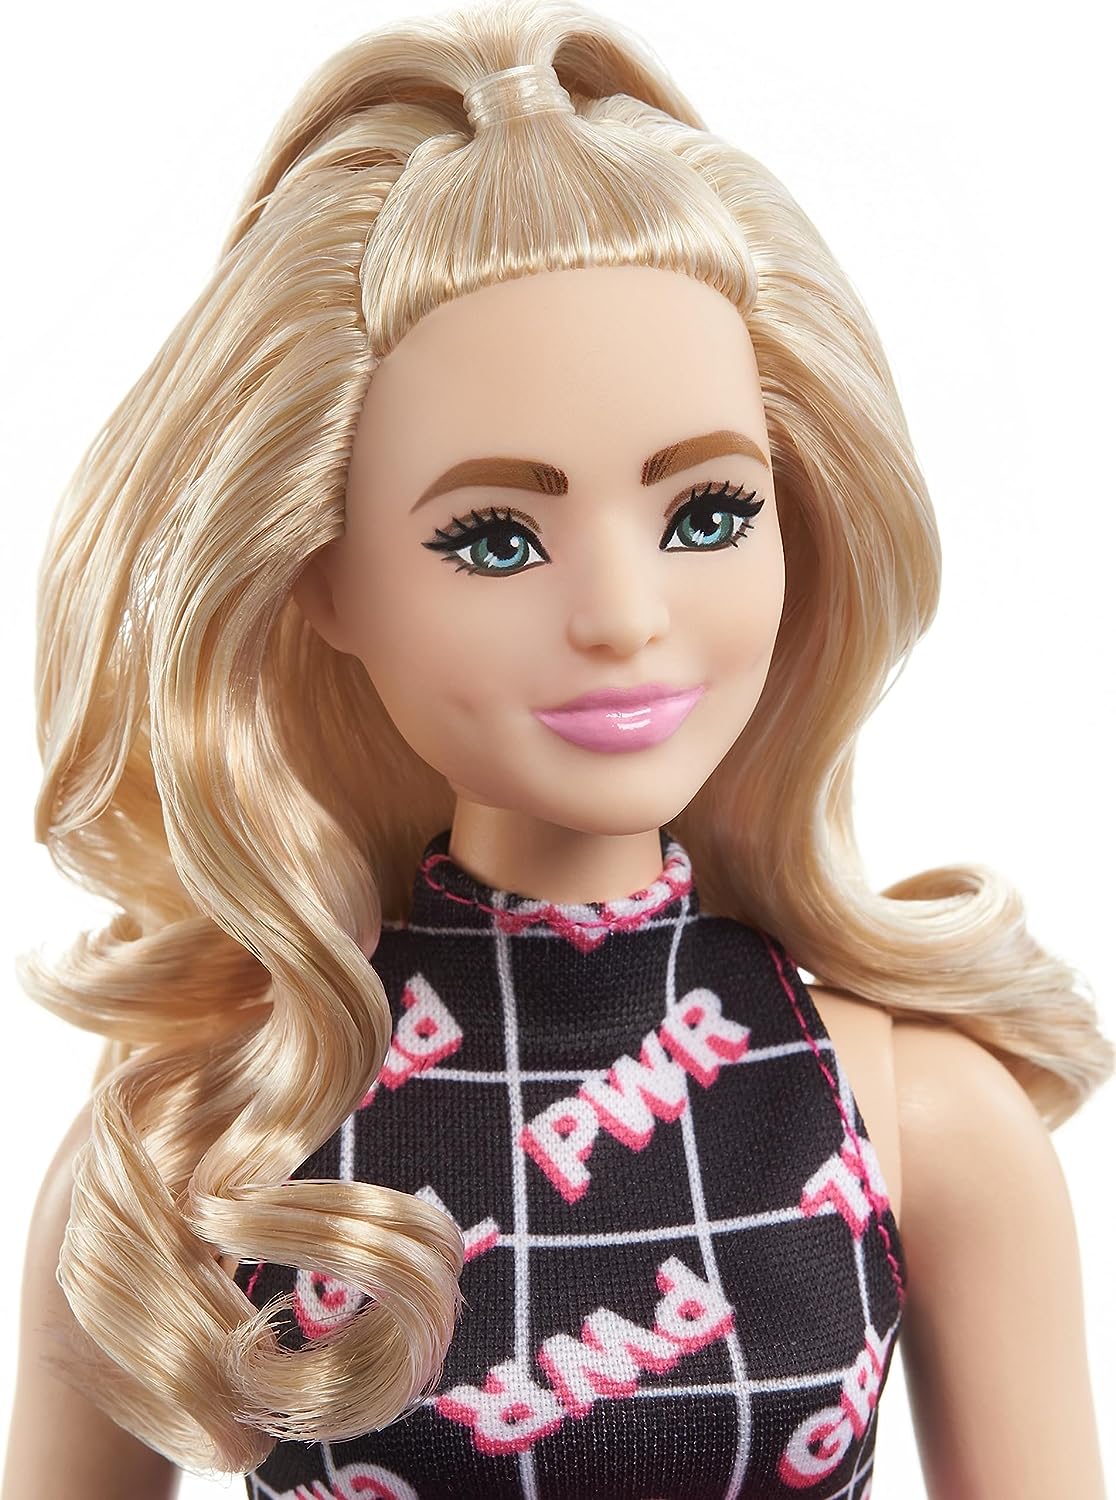 Barbie Fashionistas Curvy Blonde Doll In Girl Power Outfit #202 for Kids Ages 3+ (HPF78)